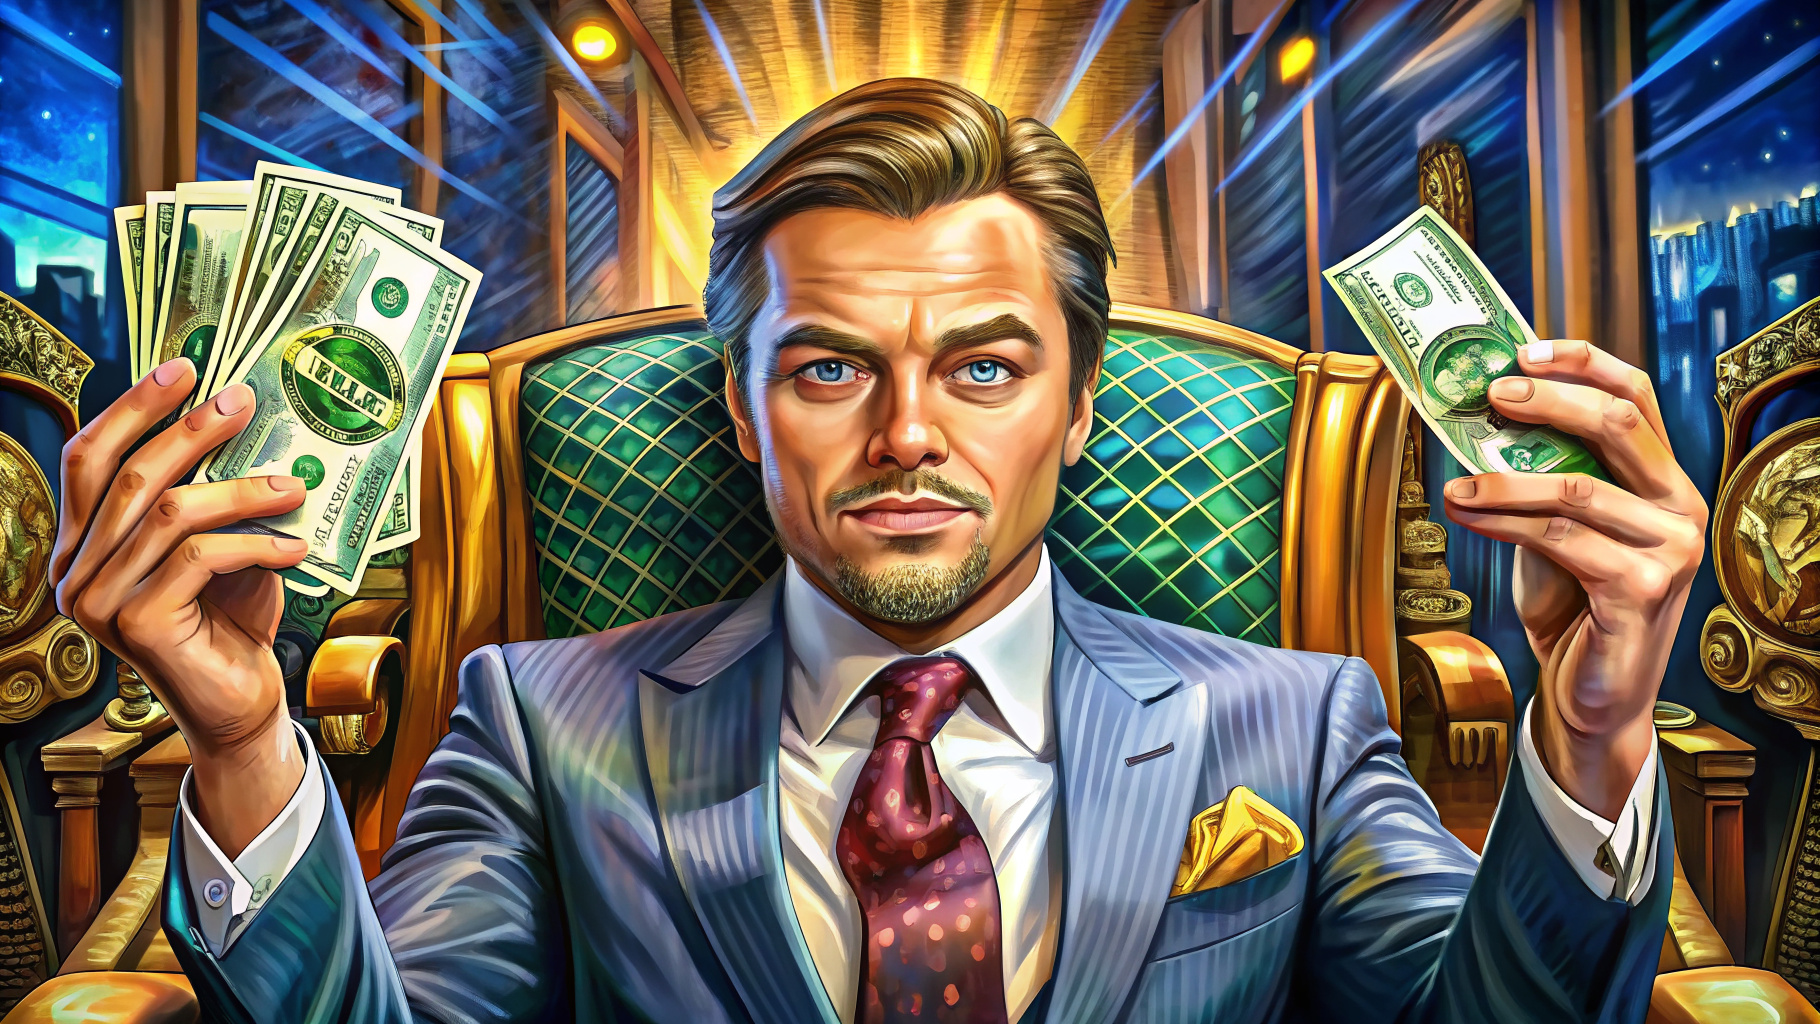 recreate the image from the film the wolf of wall street played by leonardo dicaprio holding a 100 dollar bill with both hands in front of the camera sitting in his luxury chair in a dynamic medium scene